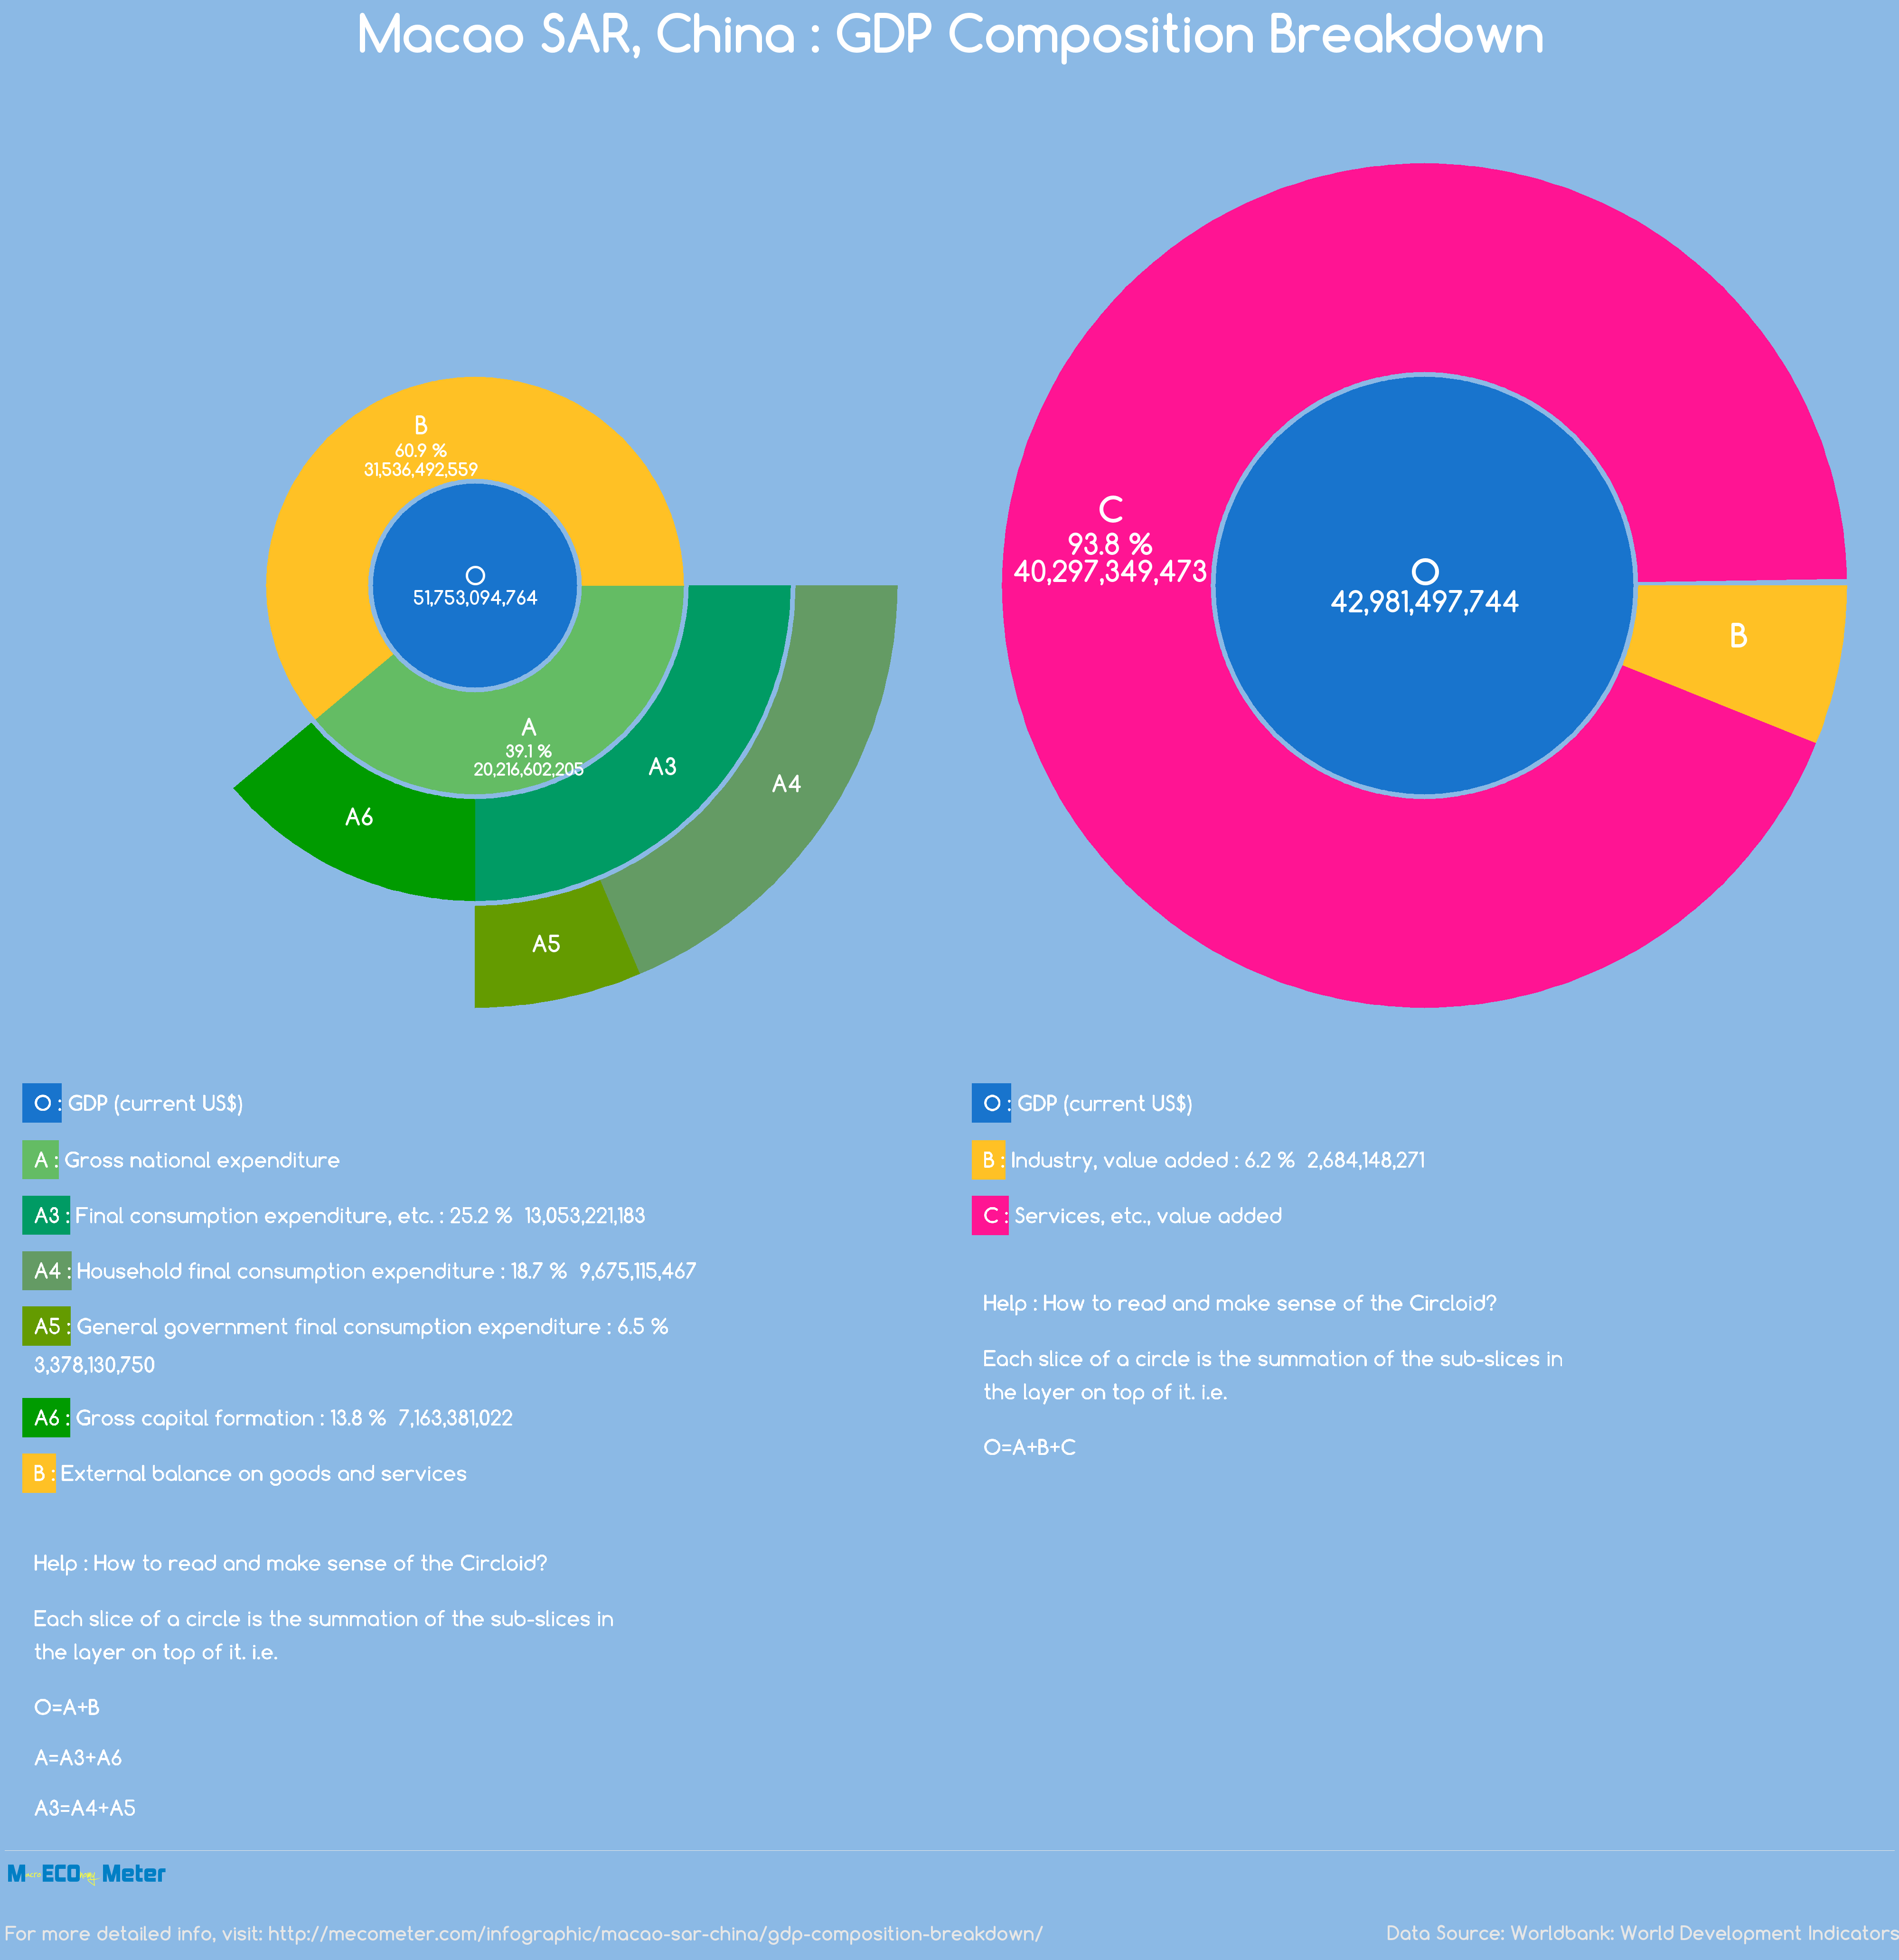 Macao SAR, China : GDP Composition Breakdown